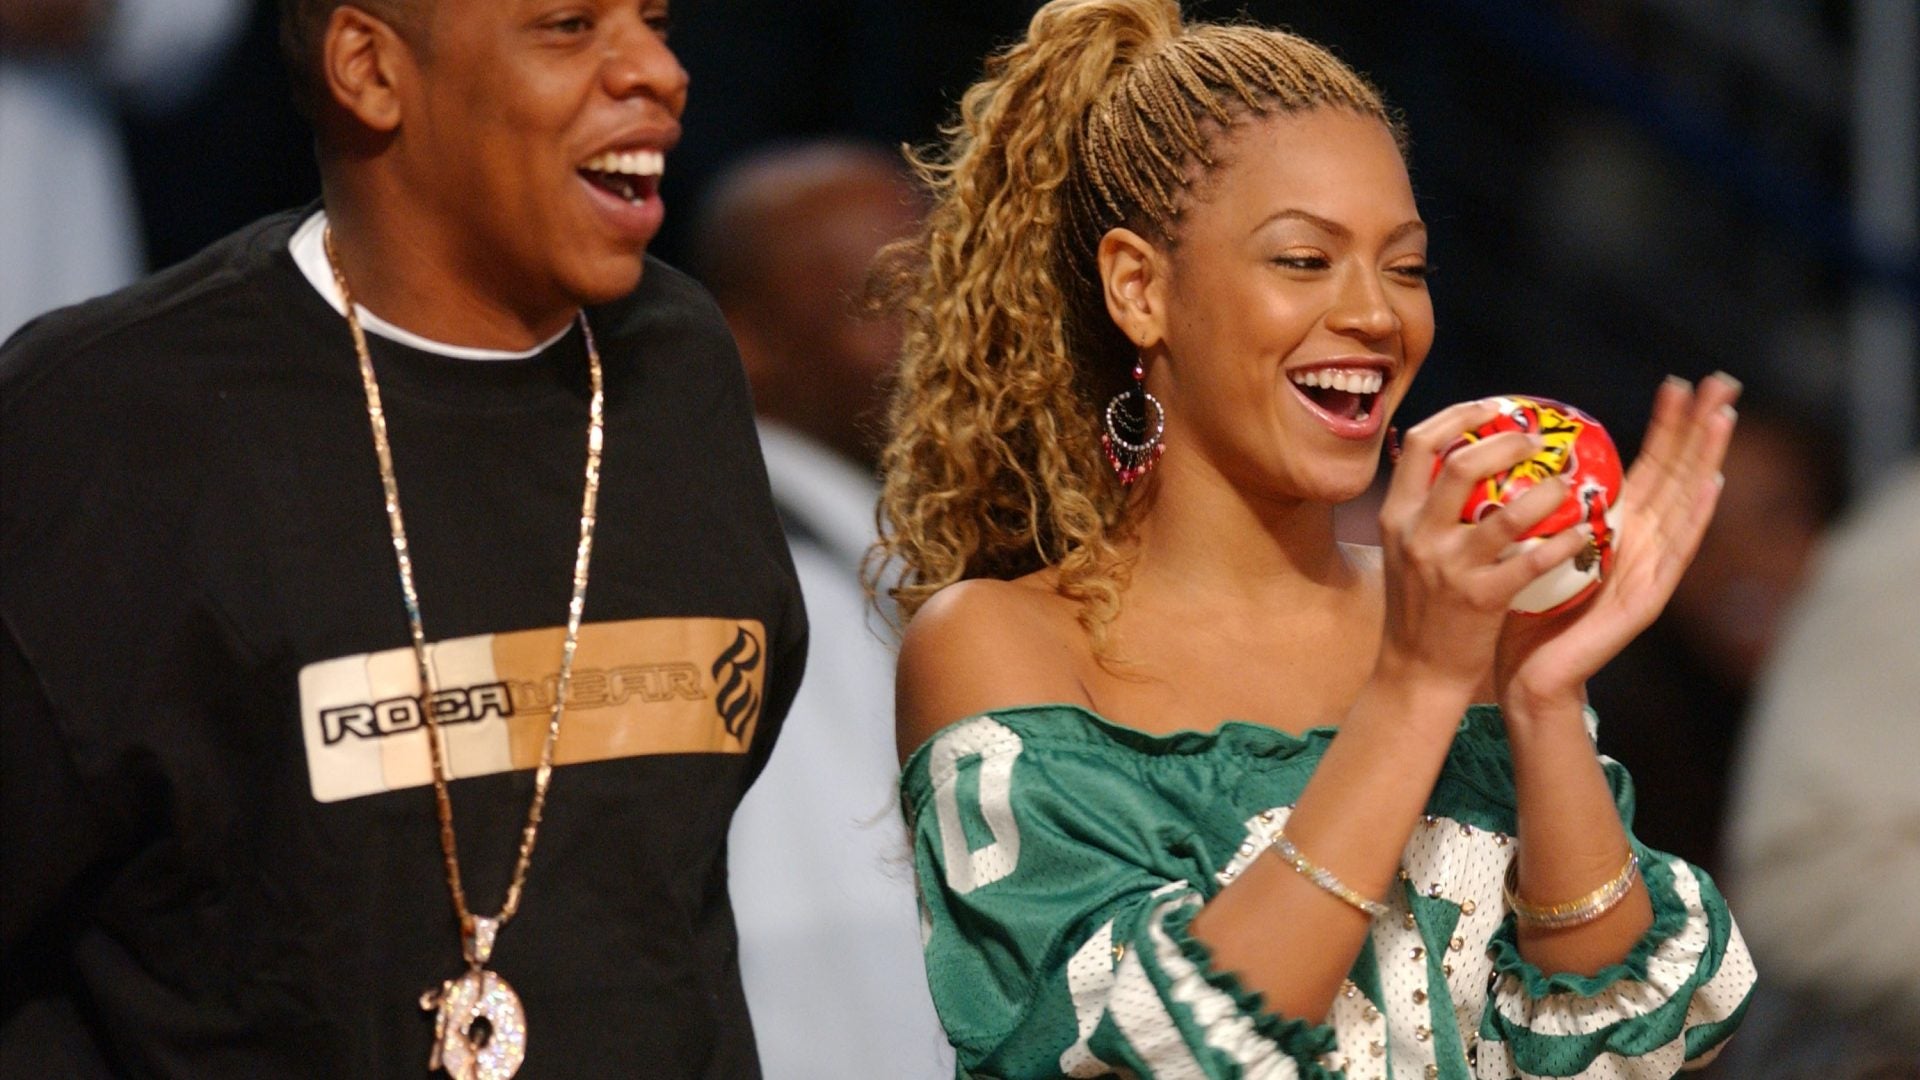 Channeling Nostalgia With This Celebrity Look: Beyoncé